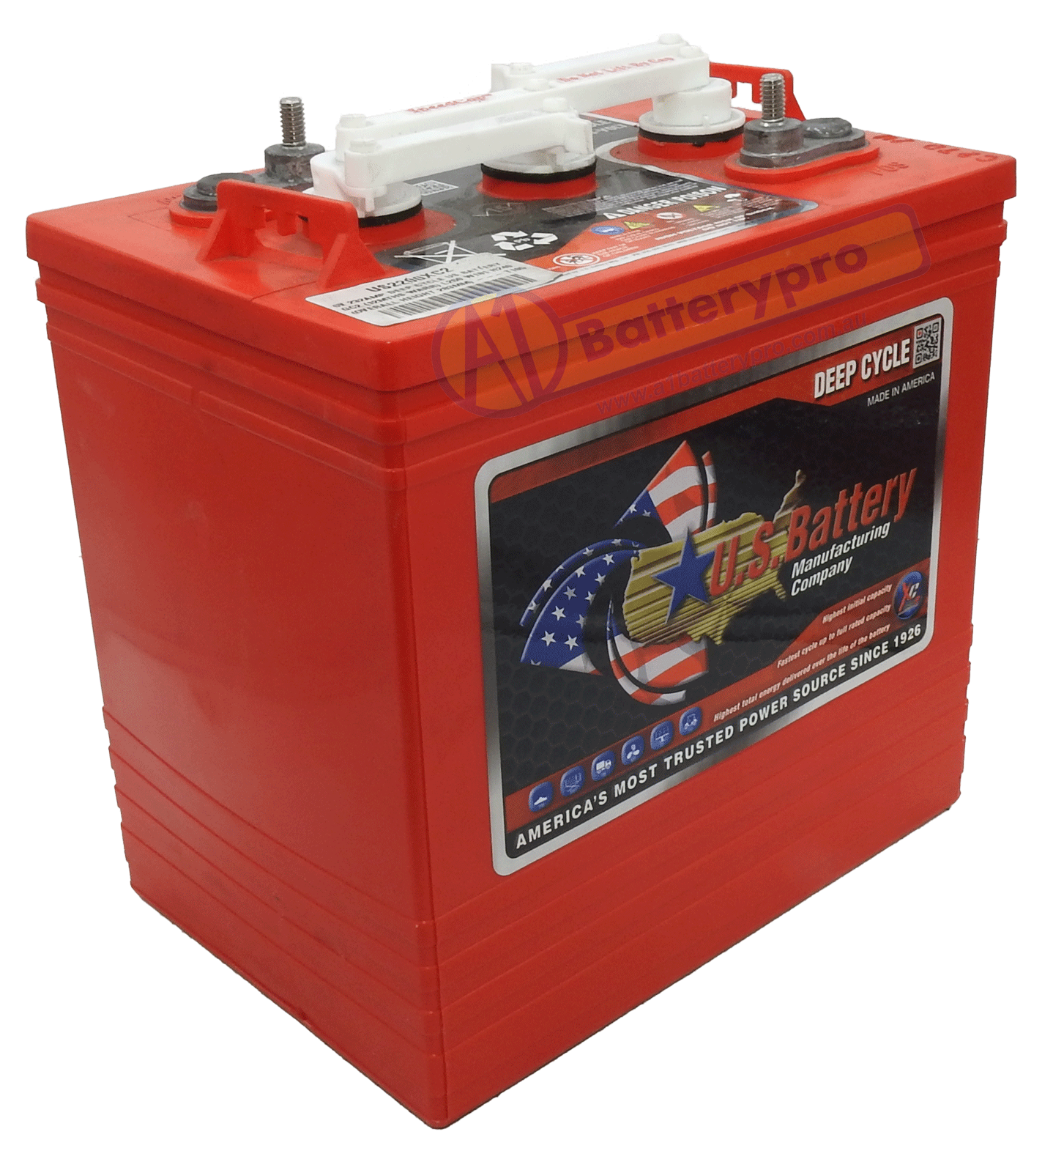 Picture of 6V 232AMP DEEP CYCLE US BATTERY GC2 (T105 EQUIV) - USA MADE